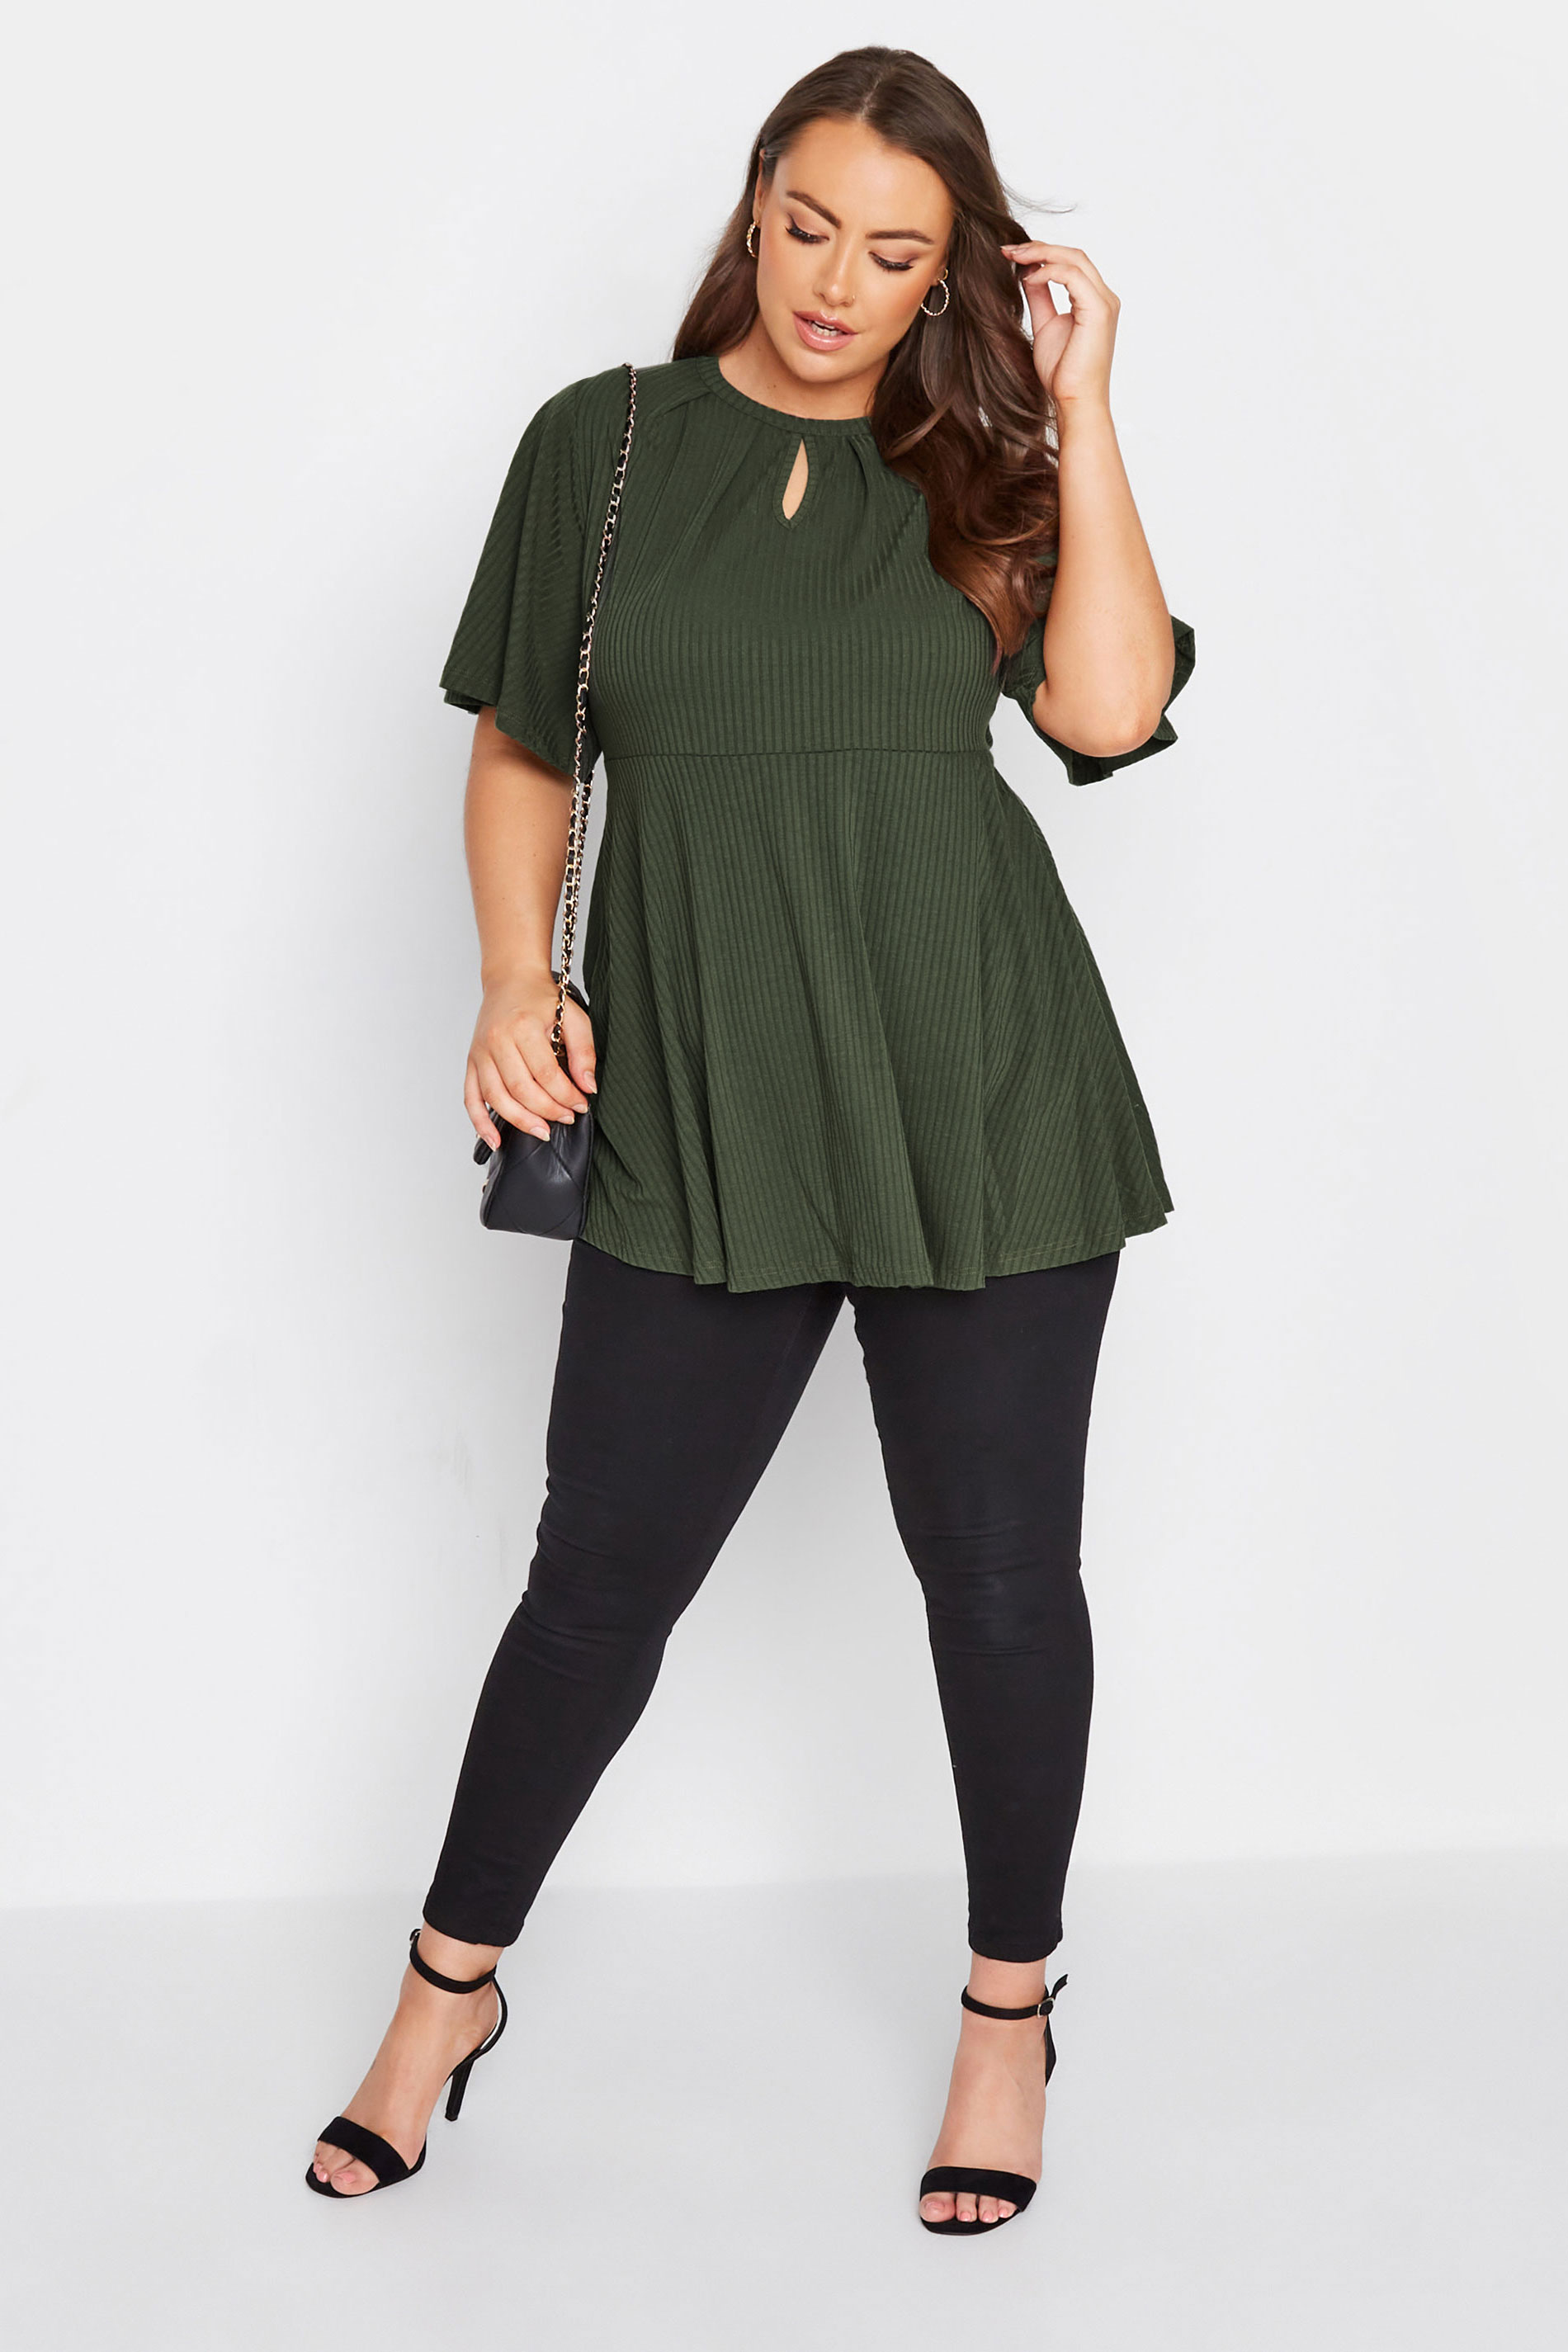 LIMITED COLLECTION Plus Size Dark Grey Keyhole Ribbed Peplum Top | Yours Clothing 2